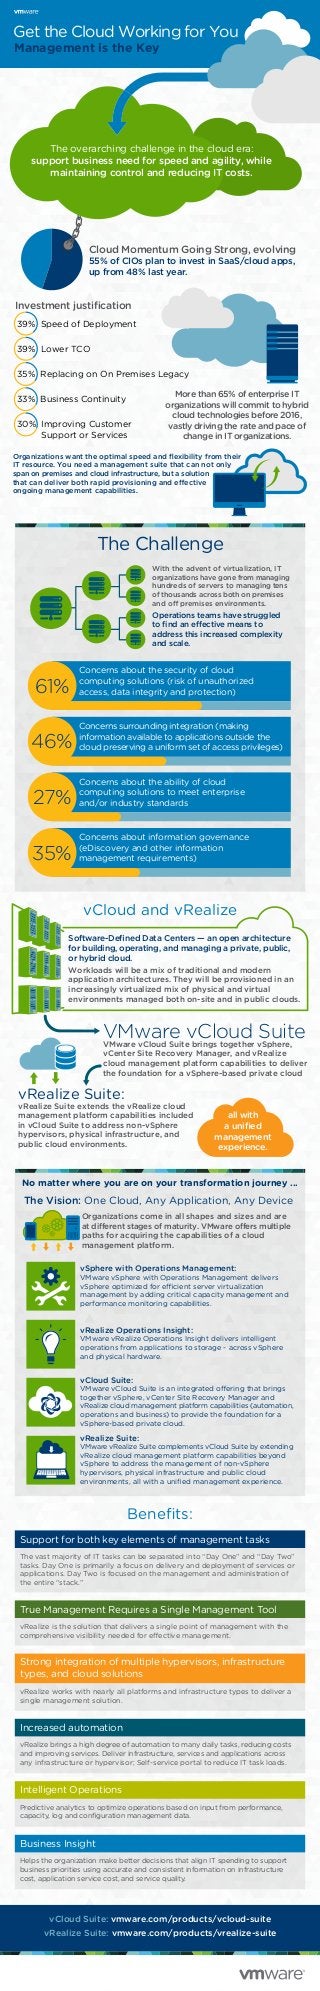 Management is the Key
Get the Cloud Working for You
The Challenge
vCloud and vRealize
Beneﬁts:
Organizations want the optimal speed and ﬂexibility from their
IT resource. You need a management suite that can not only
span on premises and cloud infrastructure, but a solution
that can deliver both rapid provisioning and effective
ongoing management capabilities.
With the advent of virtualization, IT
organizations have gone from managing
hundreds of servers to managing tens
of thousands across both on premises
and off premises environments.
Operations teams have struggled
to ﬁnd an effective means to
address this increased complexity
and scale.
Software-Deﬁned Data Centers — an open architecture
for building, operating, and managing a private, public,
or hybrid cloud.
Workloads will be a mix of traditional and modern
application architectures. They will be provisioned in an
increasingly virtualized mix of physical and virtual
environments managed both on-site and in public clouds.
VMware vCloud Suite brings together vSphere,
vCenter Site Recovery Manager, and vRealize
cloud management platform capabilities to deliver
the foundation for a vSphere-based private cloud
vRealize Suite:
vRealize Suite extends the vRealize cloud
management platform capabilities included
in vCloud Suite to address non-vSphere
hypervisors, physical infrastructure, and
public cloud environments.
The Vision: One Cloud, Any Application, Any Device
Organizations come in all shapes and sizes and are
at different stages of maturity. VMware offers multiple
paths for acquiring the capabilities of a cloud
management platform.
Concerns about the security of cloud
computing solutions (risk of unauthorized
access, data integrity and protection)
No matter where you are on your transformation journey ...
vSphere with Operations Management:
VMware vSphere with Operations Management delivers
vSphere optimized for efficient server virtualization
management by adding critical capacity management and
performance monitoring capabilities.
vRealize Operations Insight:
VMware vRealize Operations Insight delivers intelligent
operations from applications to storage - across vSphere
and physical hardware.
vCloud Suite:
VMware vCloud Suite is an integrated offering that brings
together vSphere, vCenter Site Recovery Manager and
vRealize cloud management platform capabilities (automation,
operations and business) to provide the foundation for a
vSphere-based private cloud.
vRealize Suite:
VMware vRealize Suite complements vCloud Suite by extending
vRealize cloud management platform capabilities beyond
vSphere to address the management of non-vSphere
hypervisors, physical infrastructure and public cloud
environments, all with a uniﬁed management experience.
The overarching challenge in the cloud era:
support business need for speed and agility, while
maintaining control and reducing IT costs.
Cloud Momentum Going Strong, evolving
55% of CIOs plan to invest in SaaS/cloud apps,
up from 48% last year.
Investment justiﬁcation
39% Speed of Deployment
39% Lower TCO
35% Replacing on On Premises Legacy
33% Business Continuity
30% Improving Customer
Support or Services
More than 65% of enterprise IT
organizations will commit to hybrid
cloud technologies before 2016,
vastly driving the rate and pace of
change in IT organizations.
61%
Concerns surrounding integration (making
information available to applications outside the
cloud preserving a uniform set of access privileges)46%
Concerns about the ability of cloud
computing solutions to meet enterprise
and/or industry standards27%
Concerns about information governance
(eDiscovery and other information
management requirements)35%
VMware vCloud Suite
all with
a uniﬁed
management
experience.
Support for both key elements of management tasks
The vast majority of IT tasks can be separated into “Day One” and “Day Two”
tasks. Day One is primarily a focus on delivery and deployment of services or
applications. Day Two is focused on the management and administration of
the entire “stack.”
True Management Requires a Single Management Tool
vRealize is the solution that delivers a single point of management with the
comprehensive visibility needed for effective management.
Increased automation
vRealize brings a high degree of automation to many daily tasks, reducing costs
and improving services. Deliver infrastructure, services and applications across
any infrastructure or hypervisor; Self-service portal to reduce IT task loads.
Business Insight
Helps the organization make better decisions that align IT spending to support
business priorities using accurate and consistent information on infrastructure
cost, application service cost, and service quality.
Intelligent Operations
Predictive analytics to optimize operations based on input from performance,
capacity, log and conﬁguration management data.
Strong integration of multiple hypervisors, infrastructure
types, and cloud solutions
vRealize works with nearly all platforms and infrastructure types to deliver a
single management solution.
vCloud Suite: vmware.com/products/vcloud-suite
vRealize Suite: vmware.com/products/vrealize-suite
 